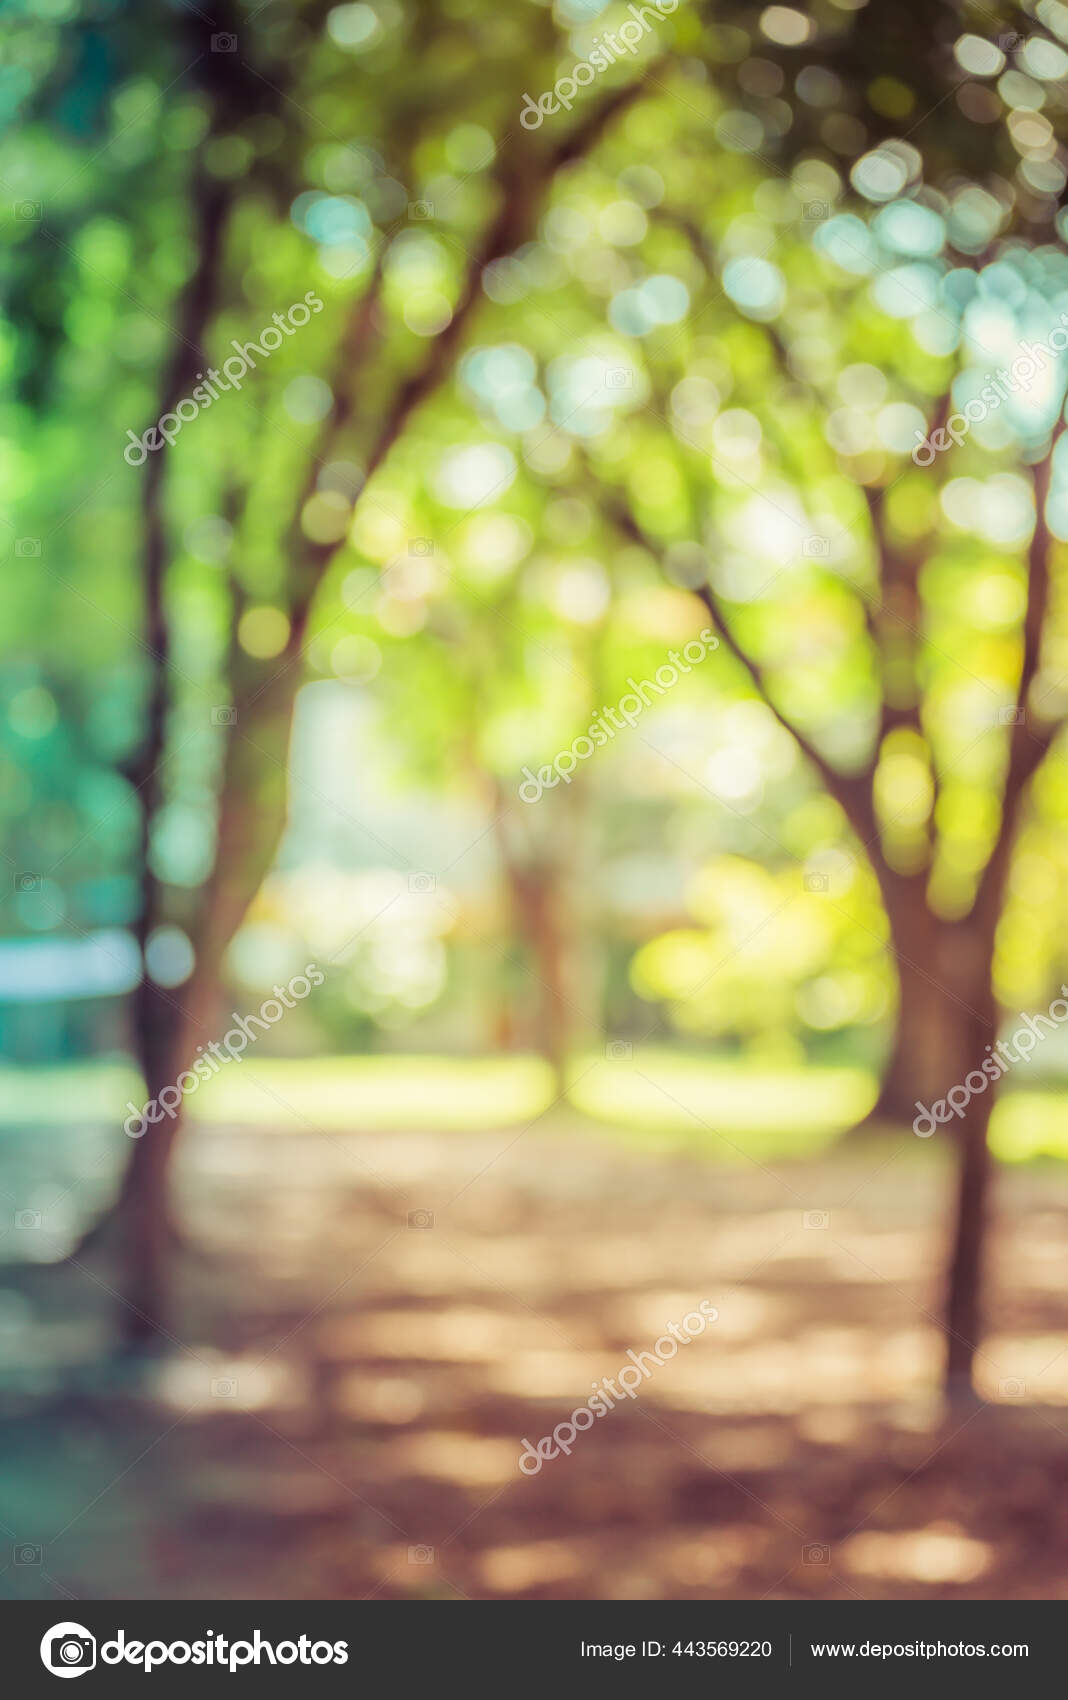 Abstract Blur Image Road Green Garden Bokeh Background Usage Stock Photo by  ©coffmancmu 443569220